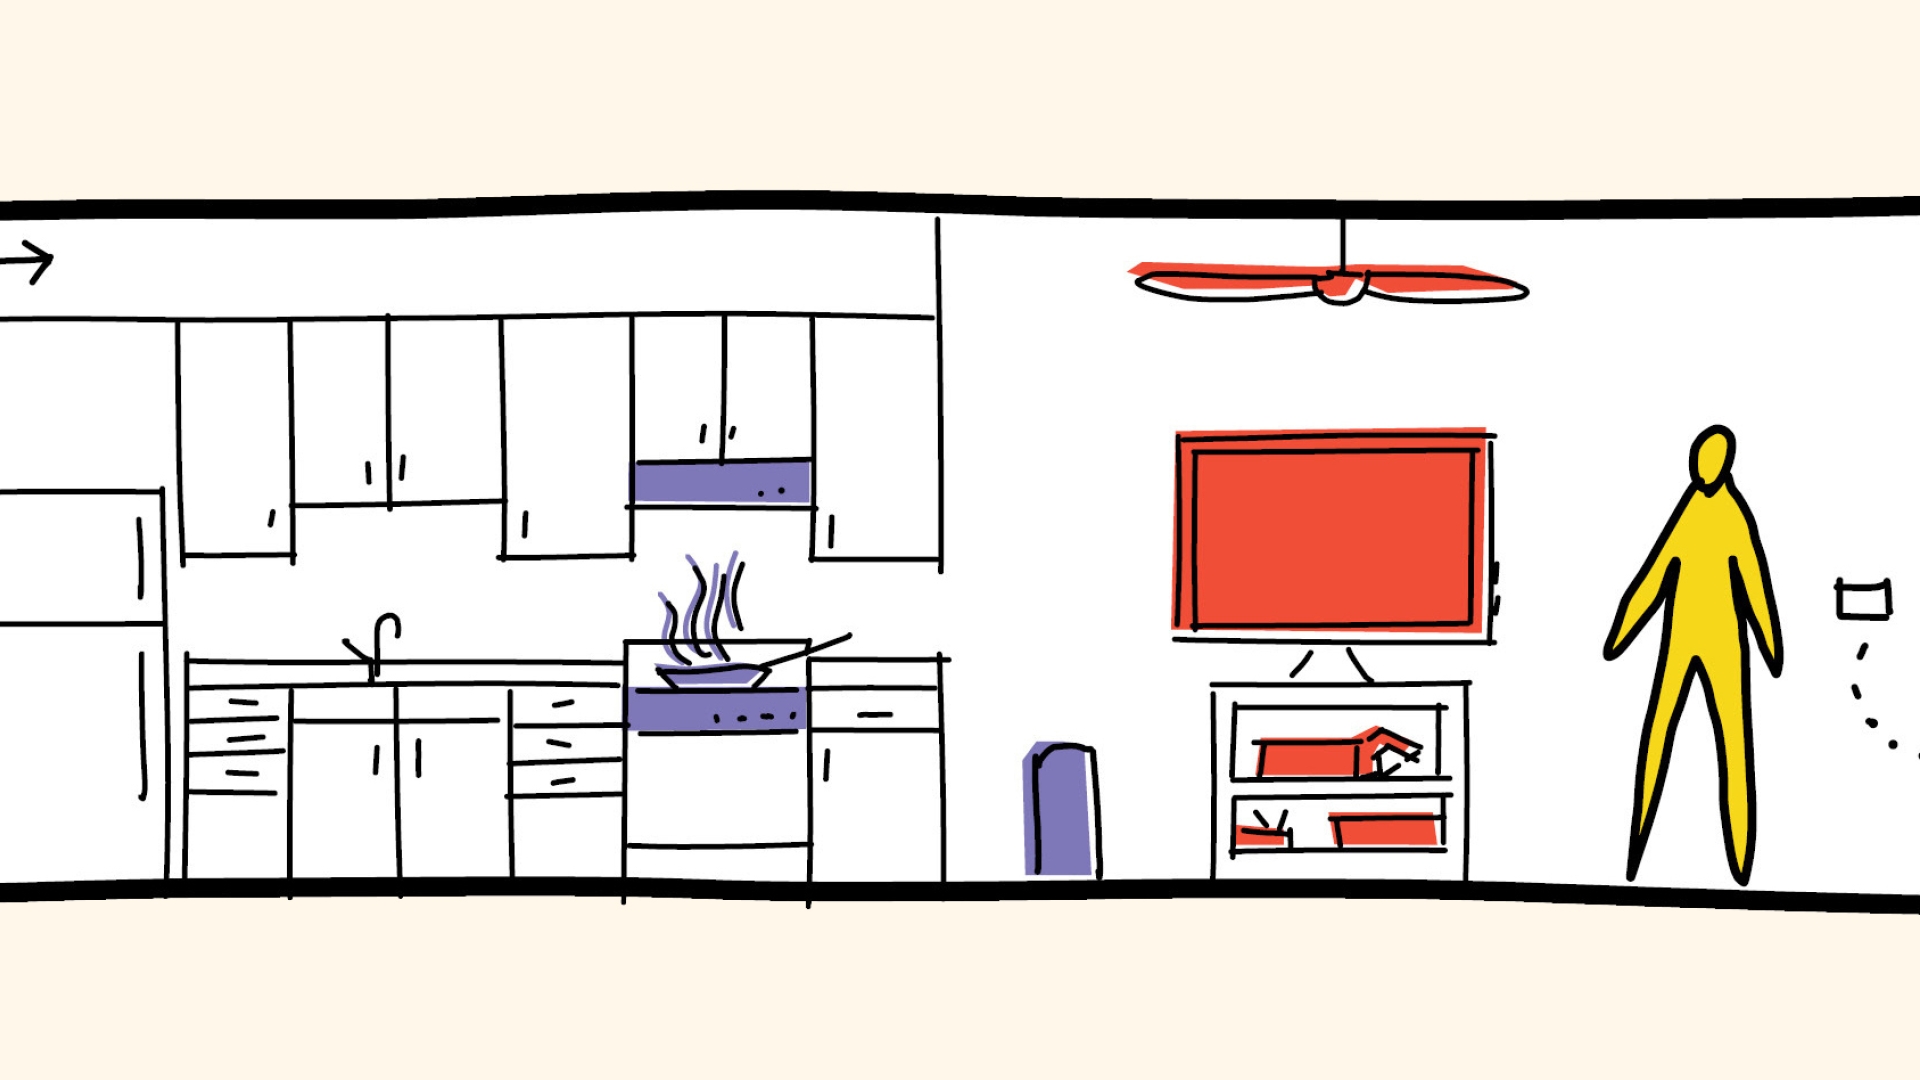 Illustration of apartment features for fire-season safety.